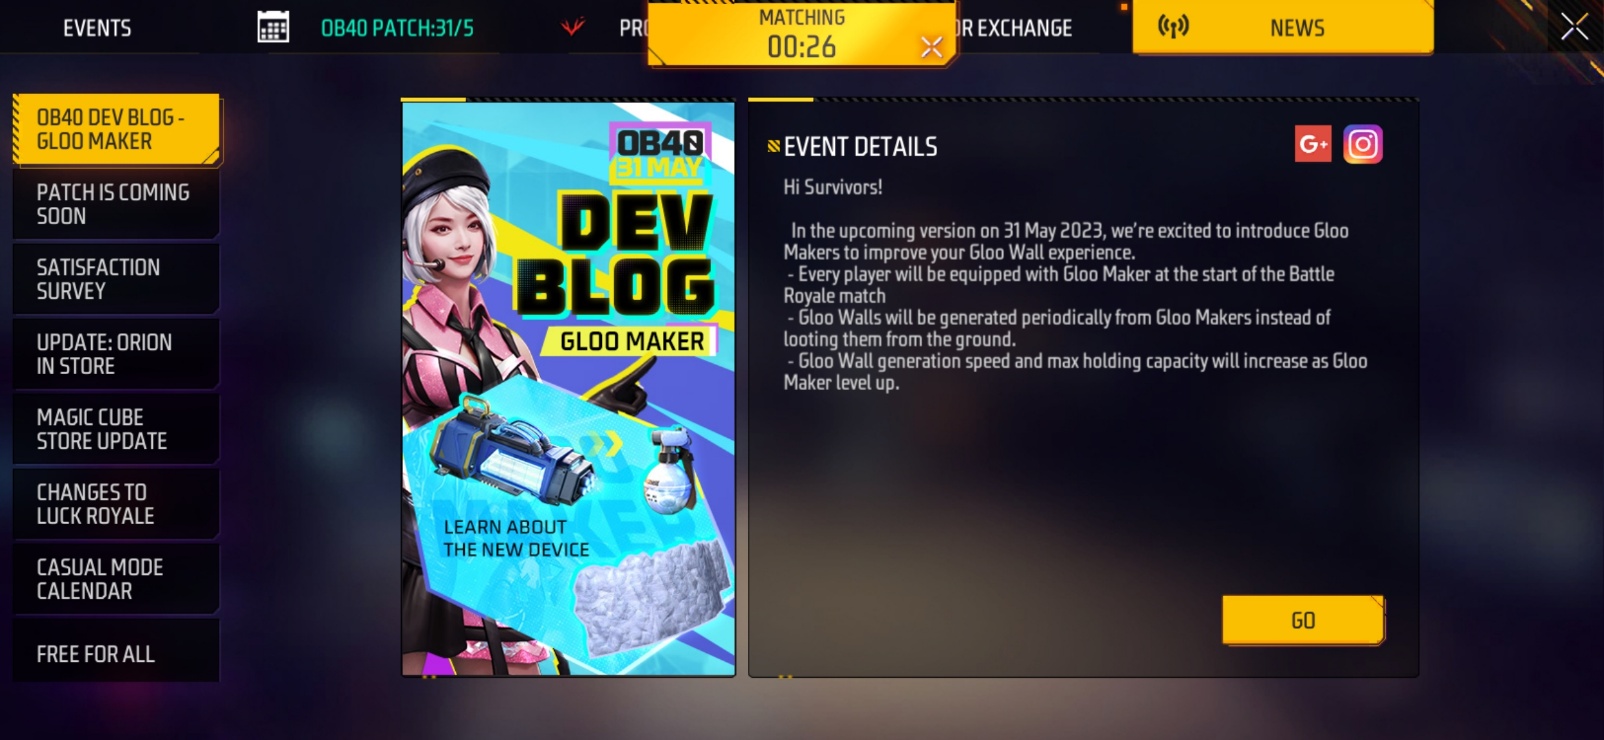 Free Fire Max OB40 Update Features And Details